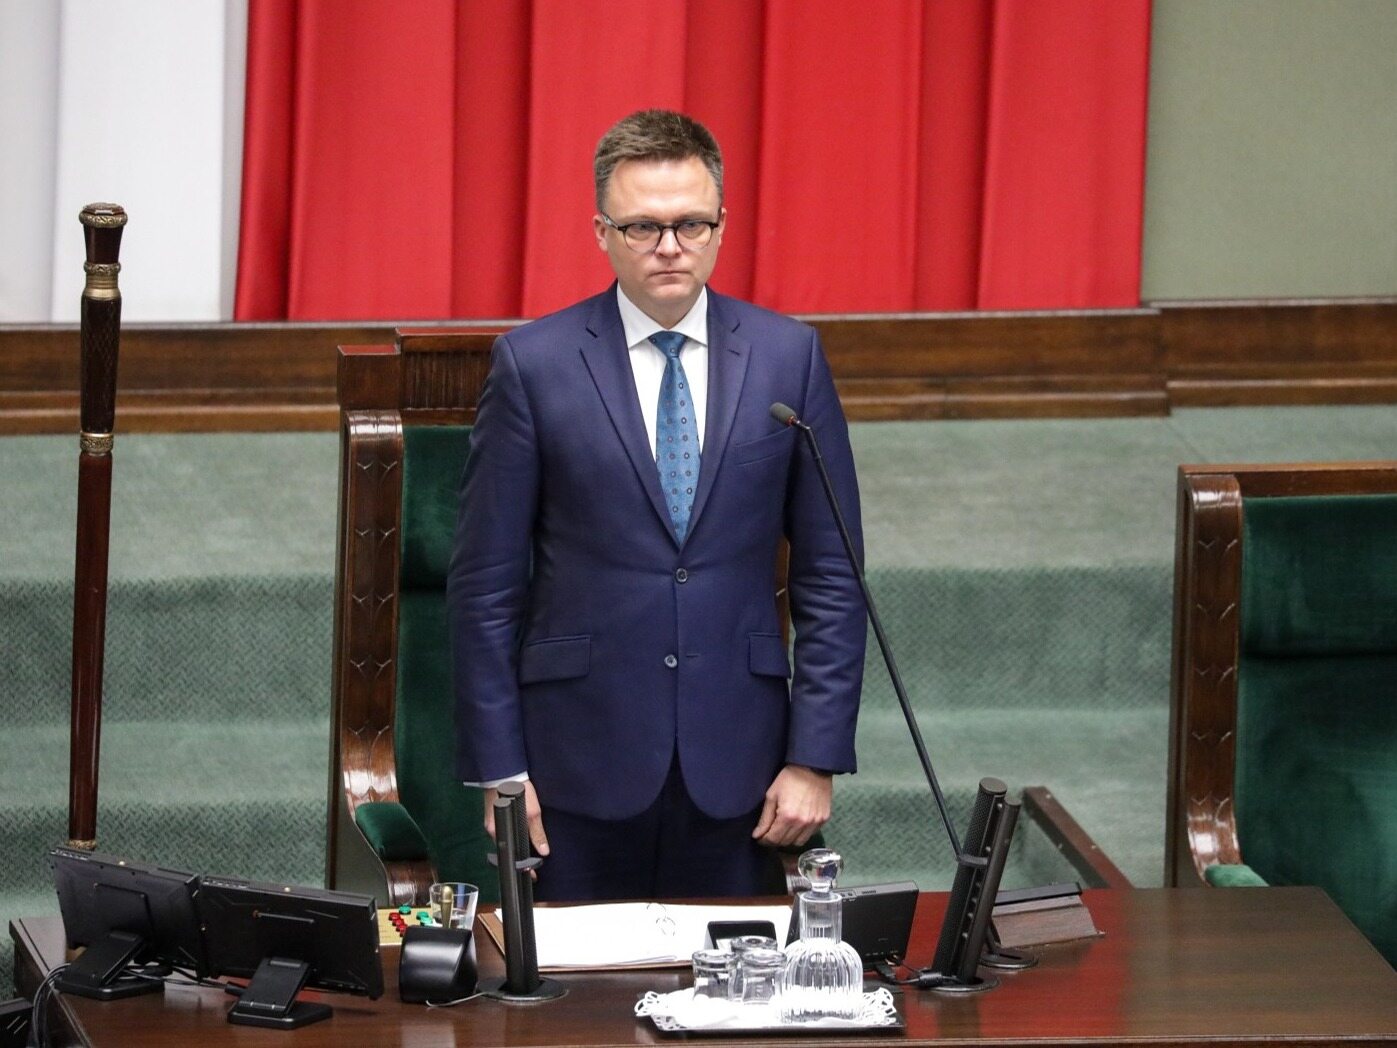 "A rising star of Polish politics."  Foreign media write about Hołownia and the process of changing power in Poland